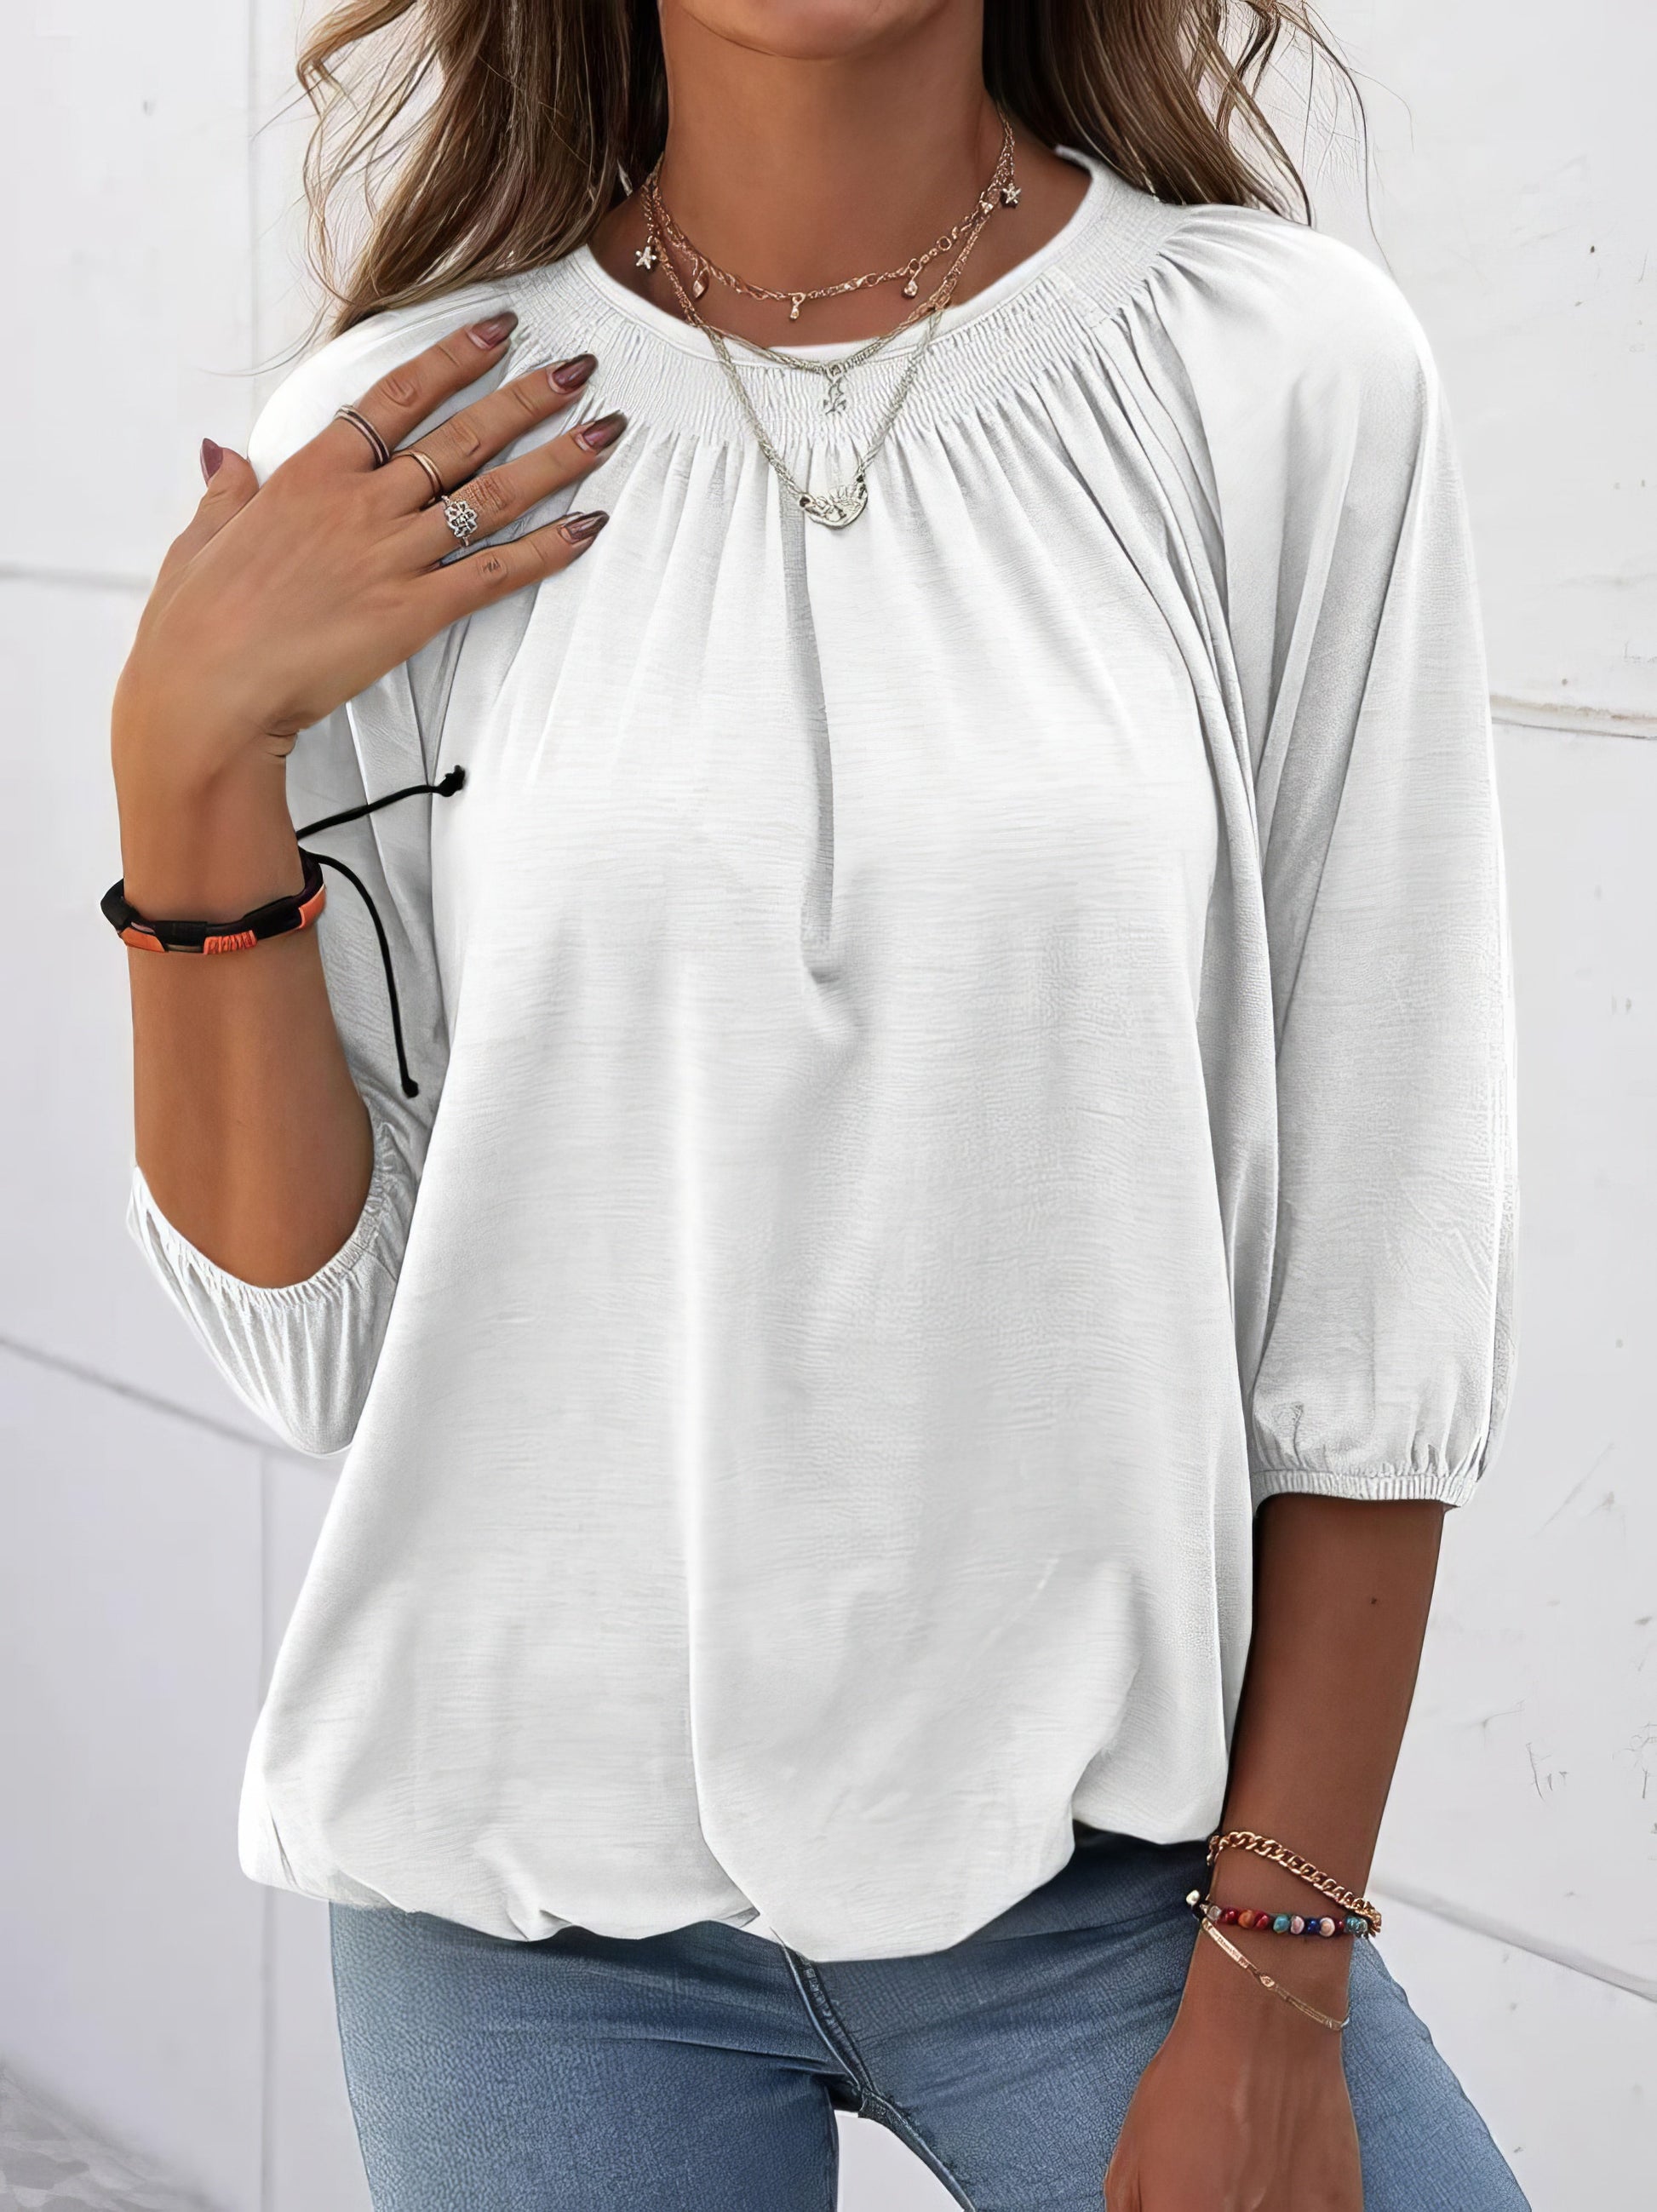 T-Shirts - Loose 3/4 Sleeve Pleated Crew Neck T-Shirt - MsDressly